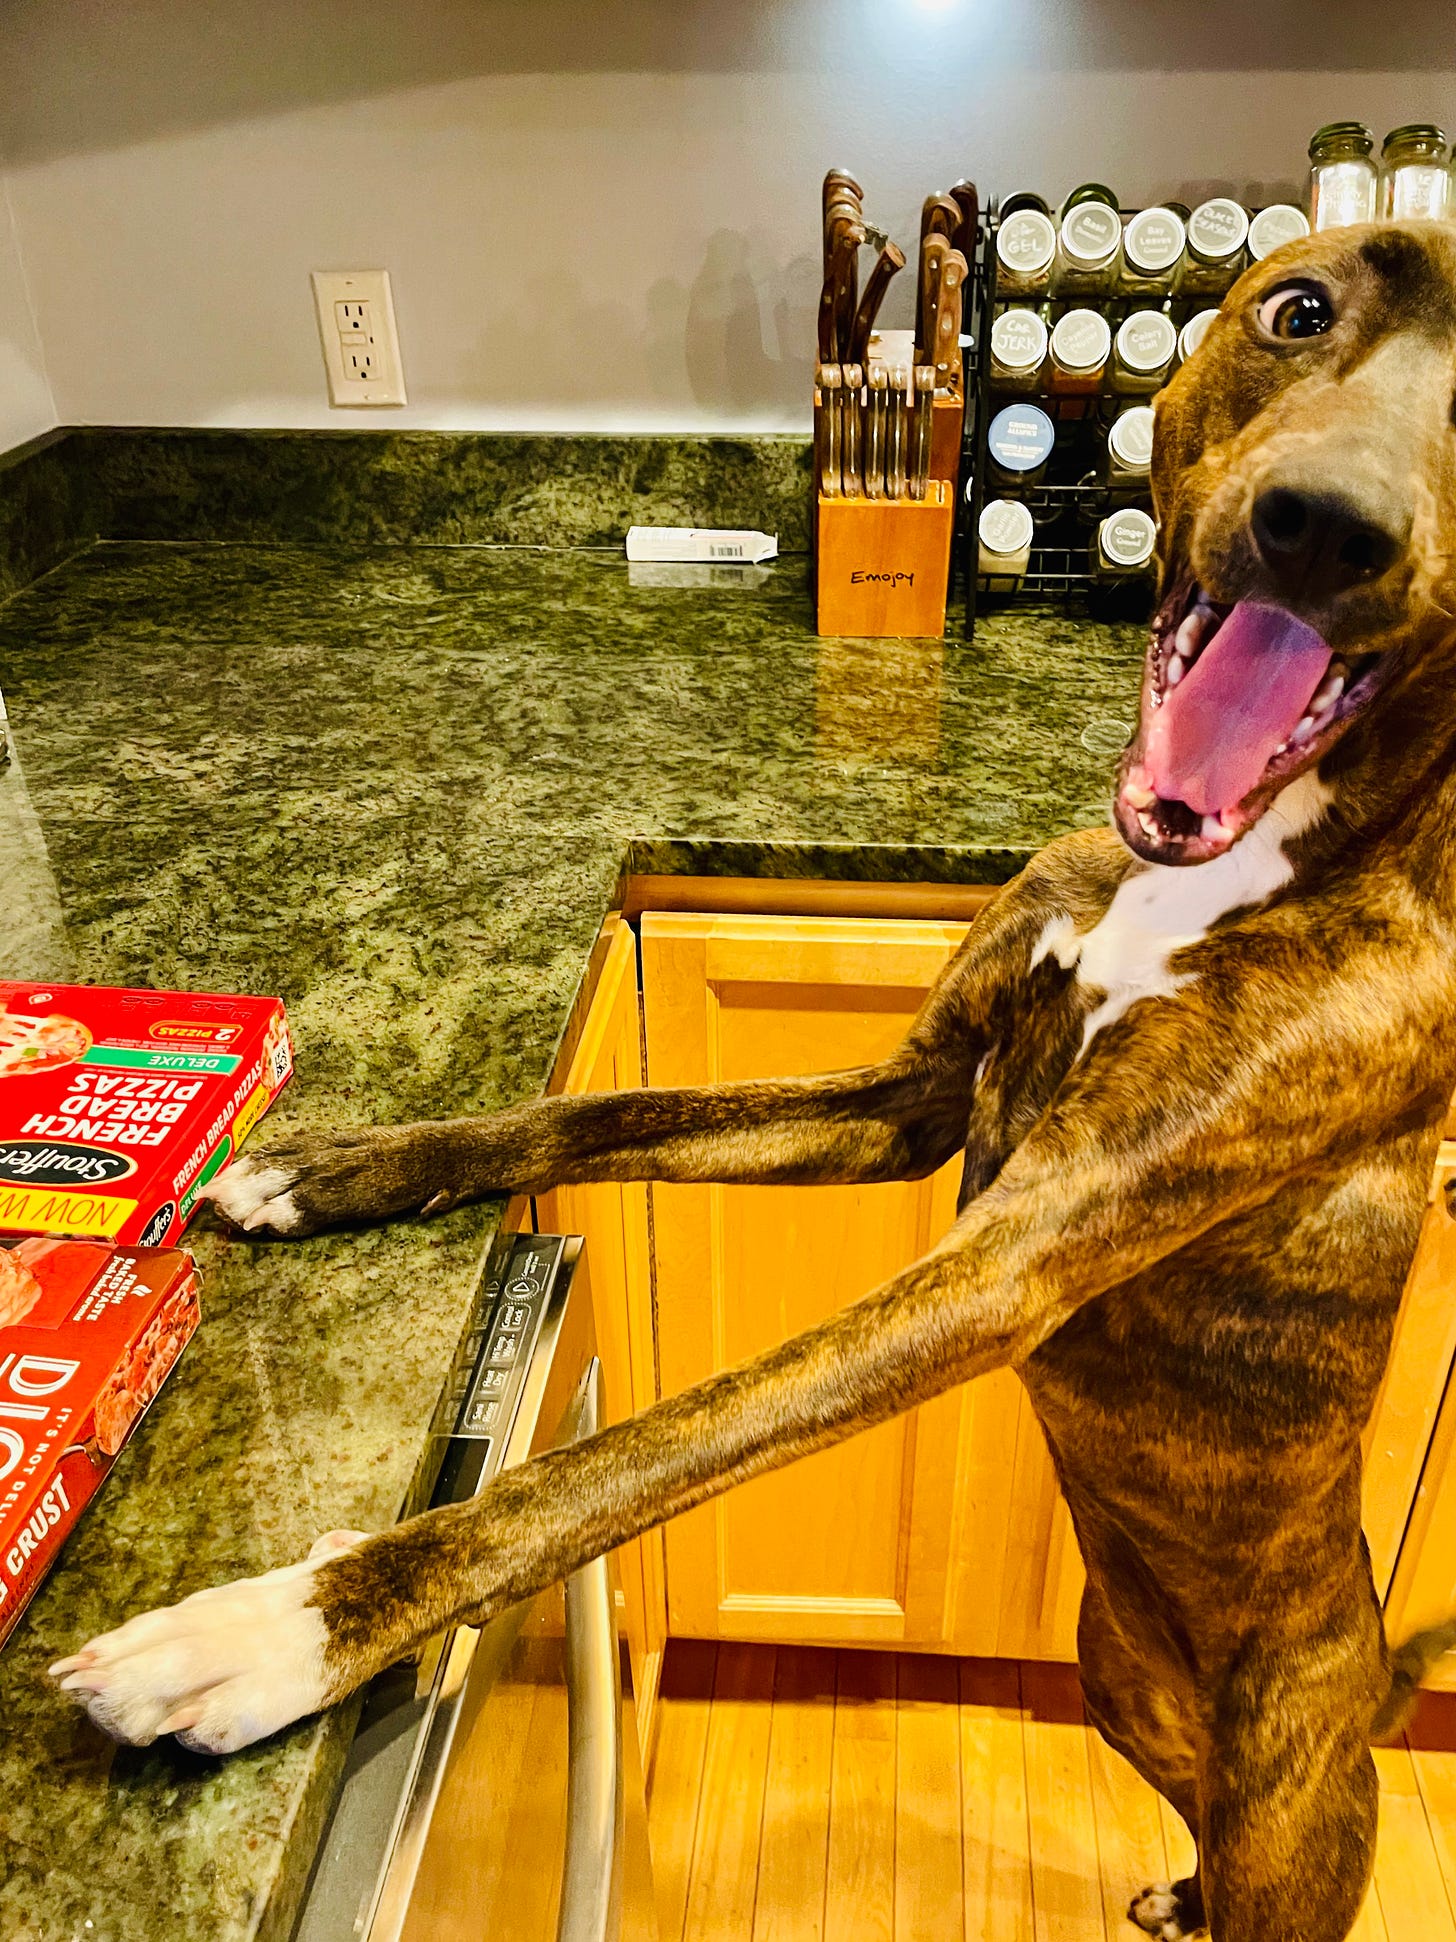 Dog standing on back legs at a kitchen counter, smiling. The edges of Stouffers and D'Giorno pizzas in their containers are seen. 